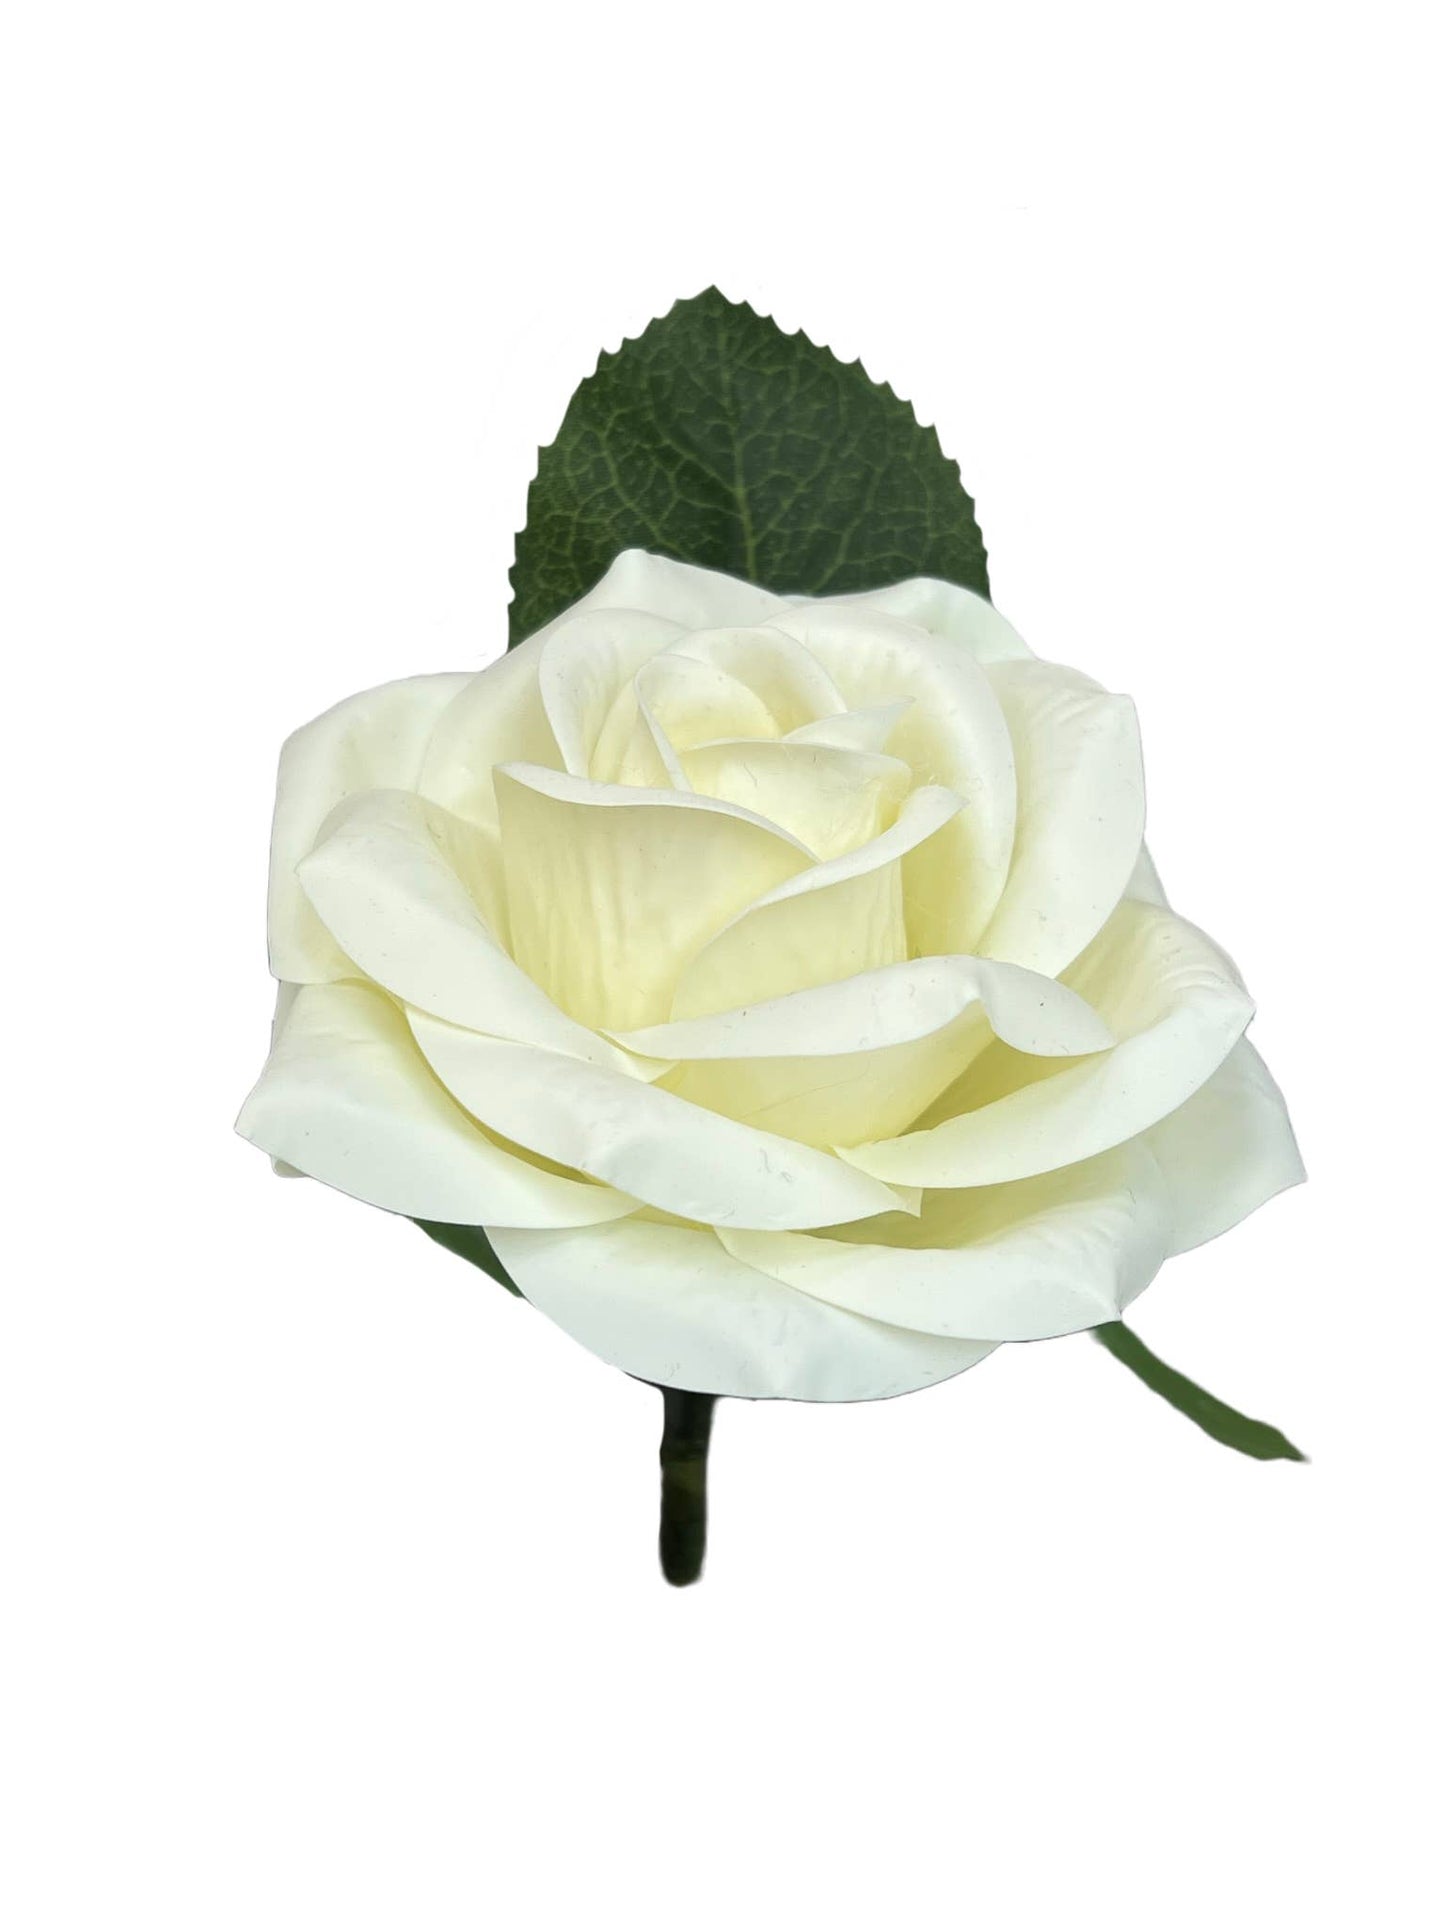 Elegant Faux Rose Boutonniere - Sophisticated Touch for Formal Events